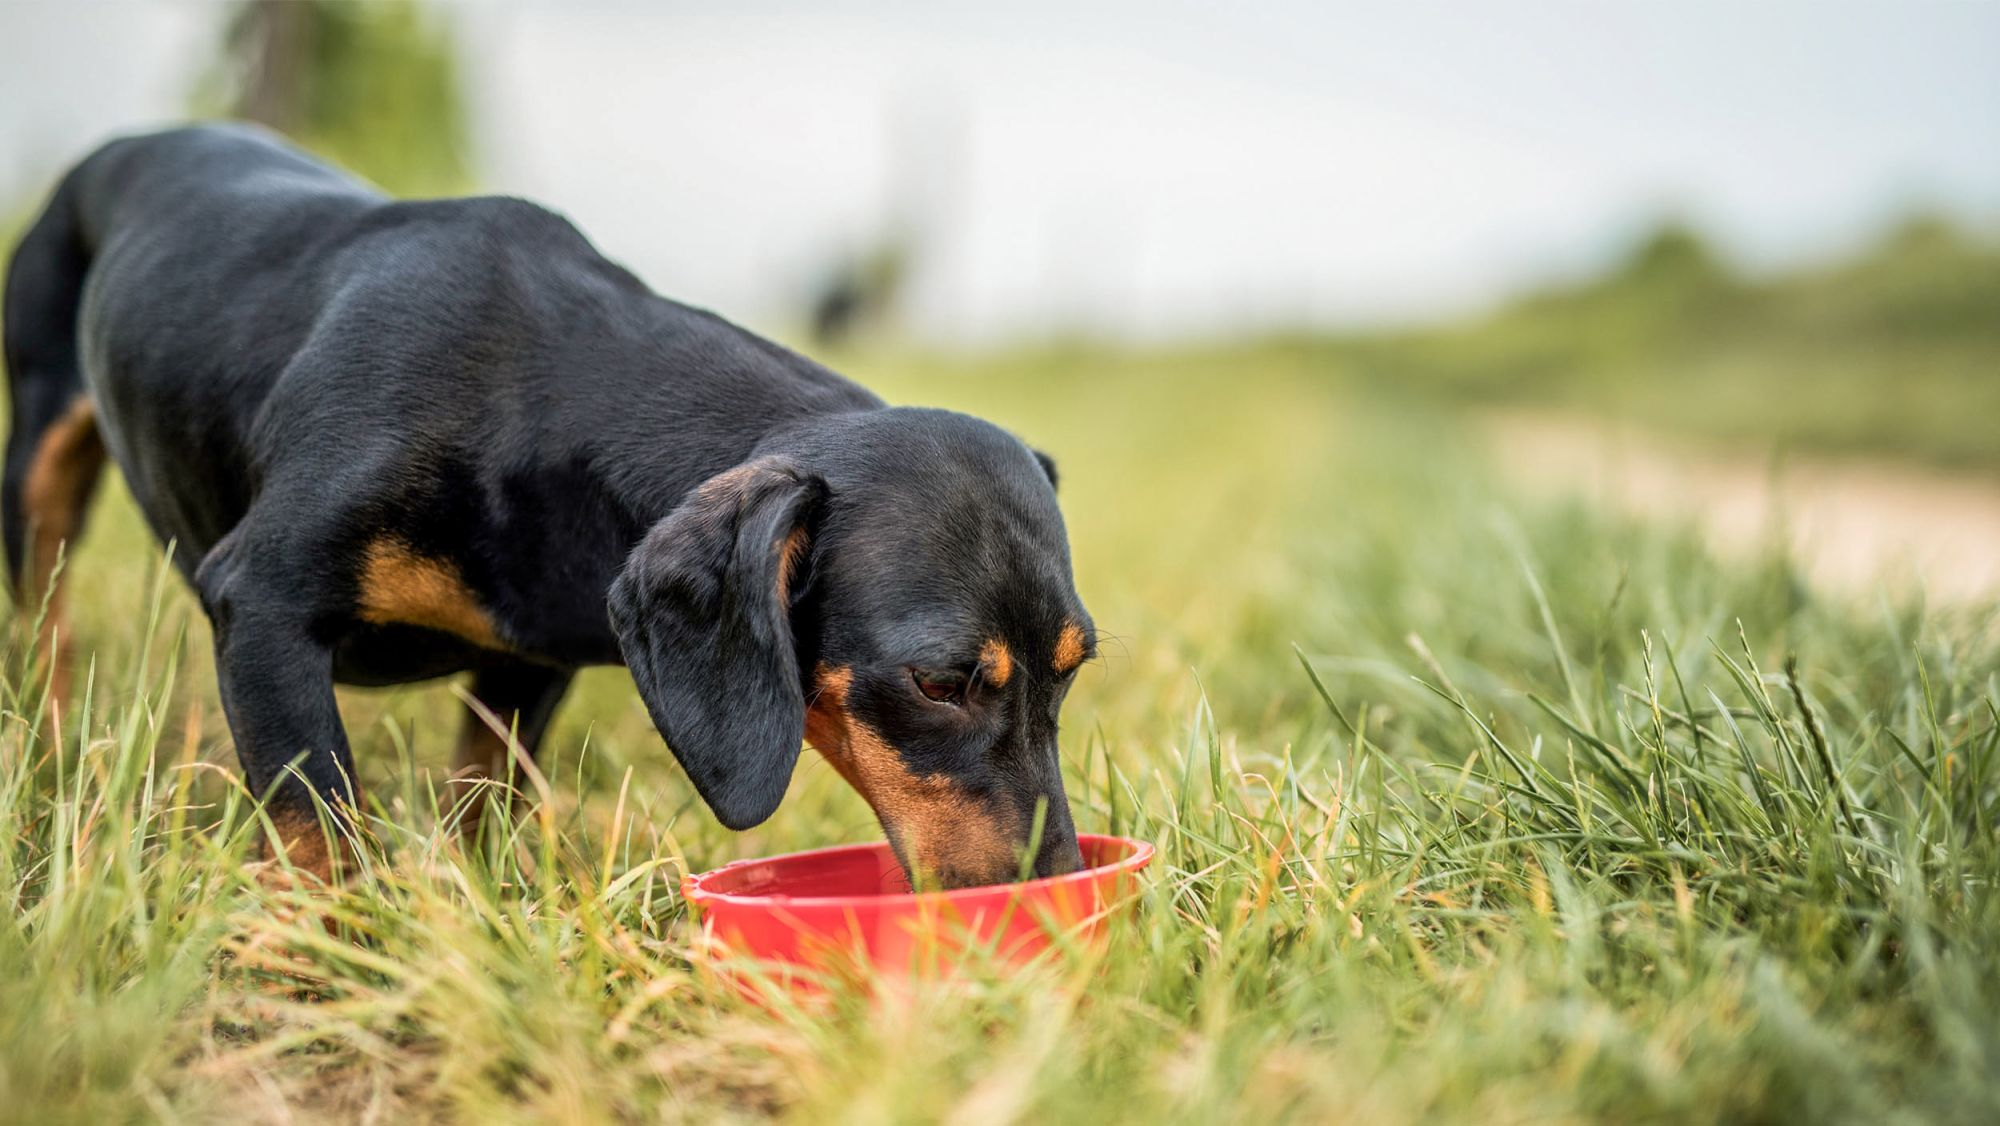 Adult dog standing outside eating from a red bowl